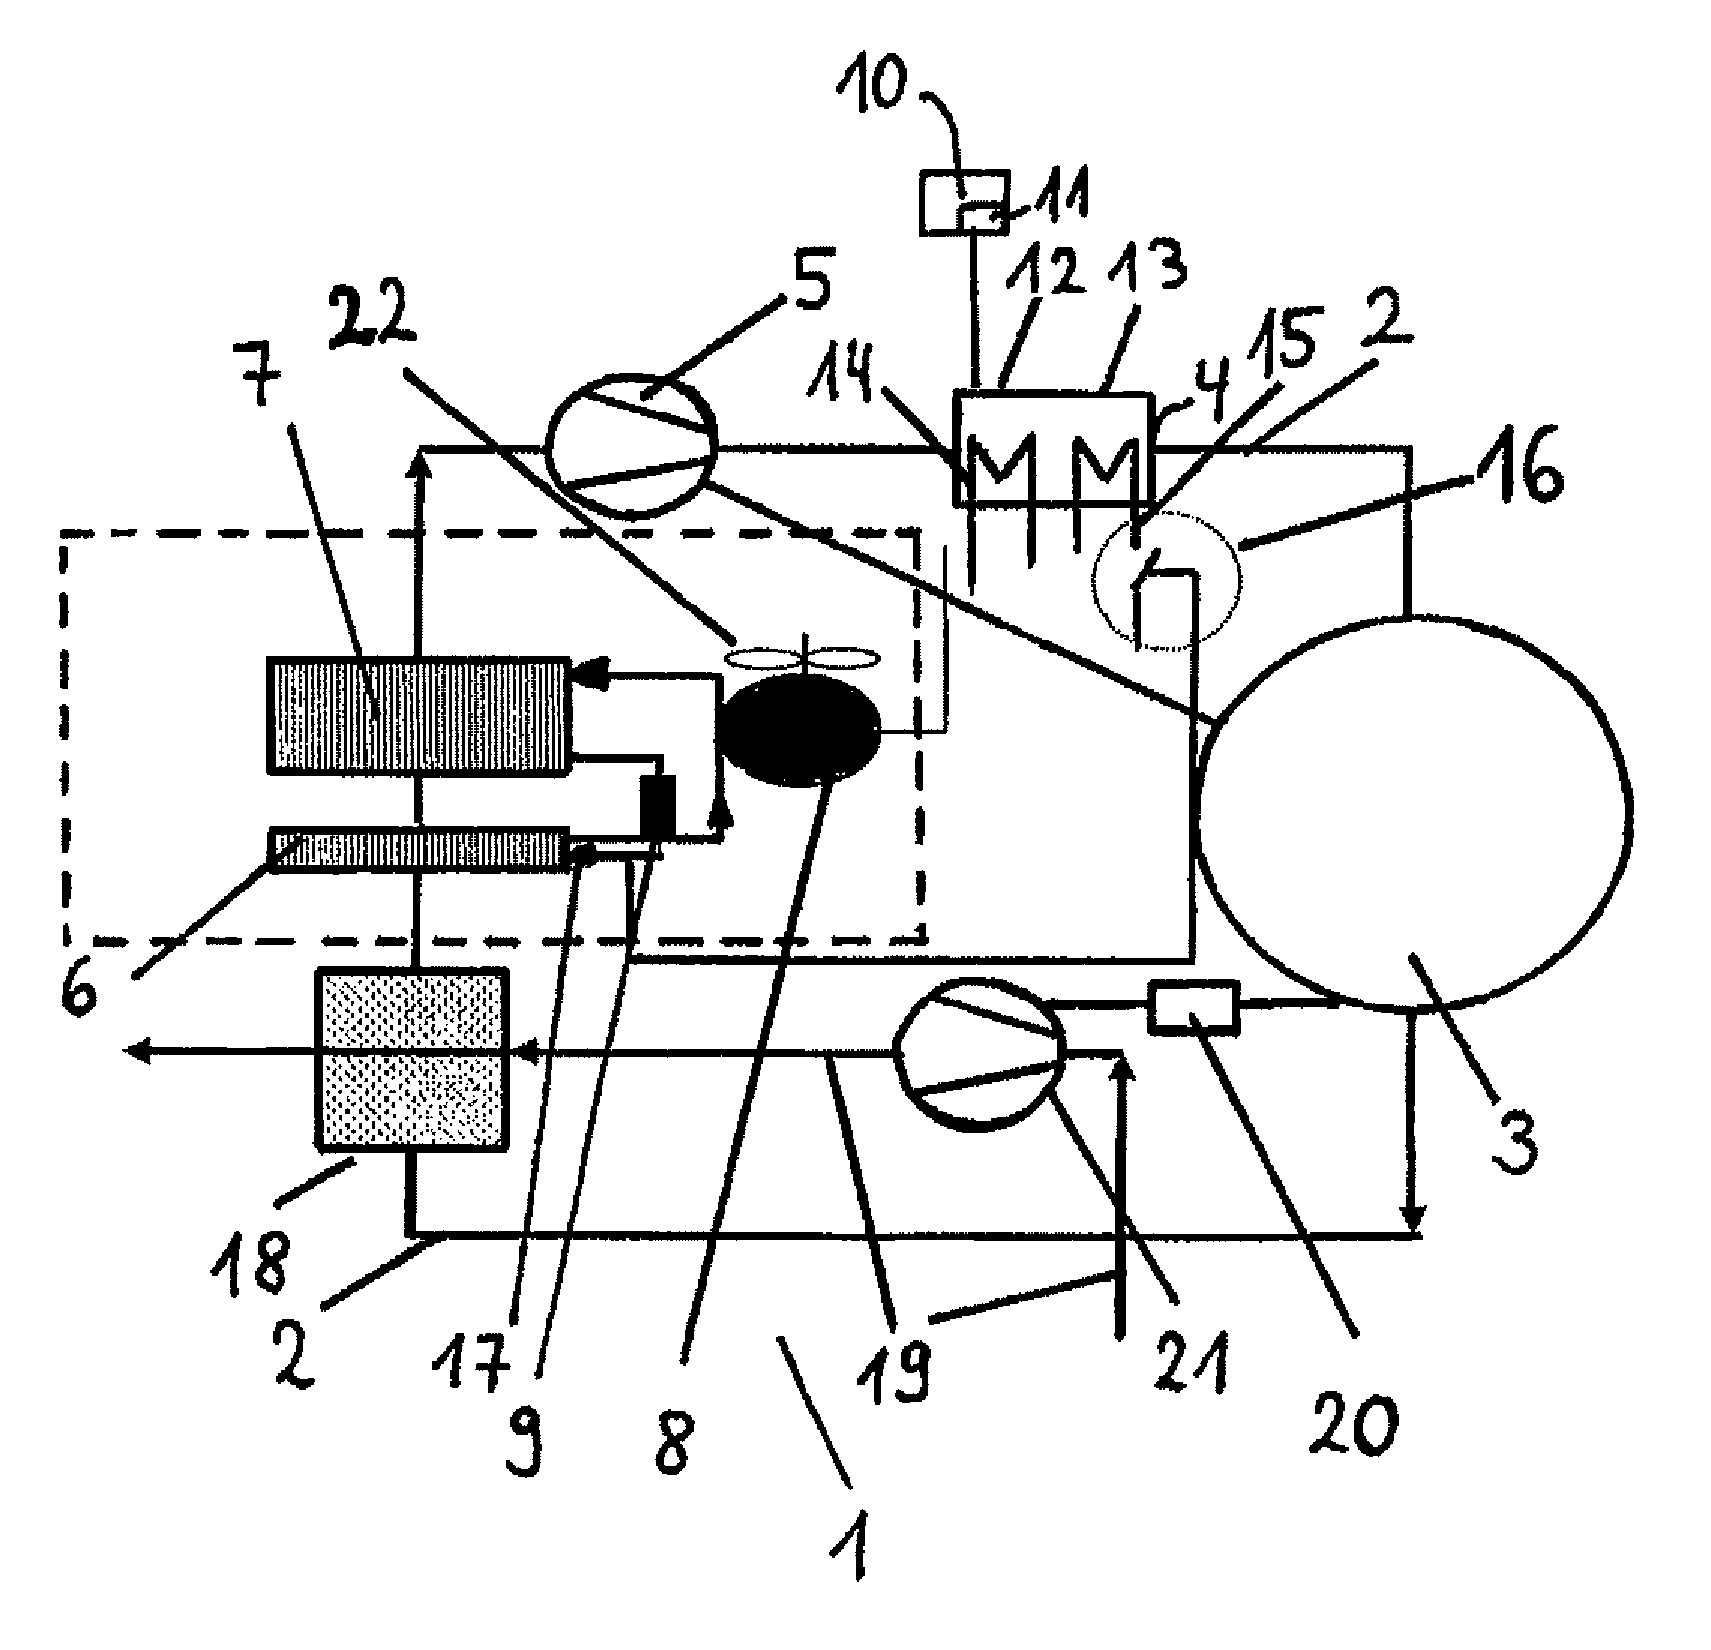 Tumble dryer comprising a heat pump and heating system and method for operating the same